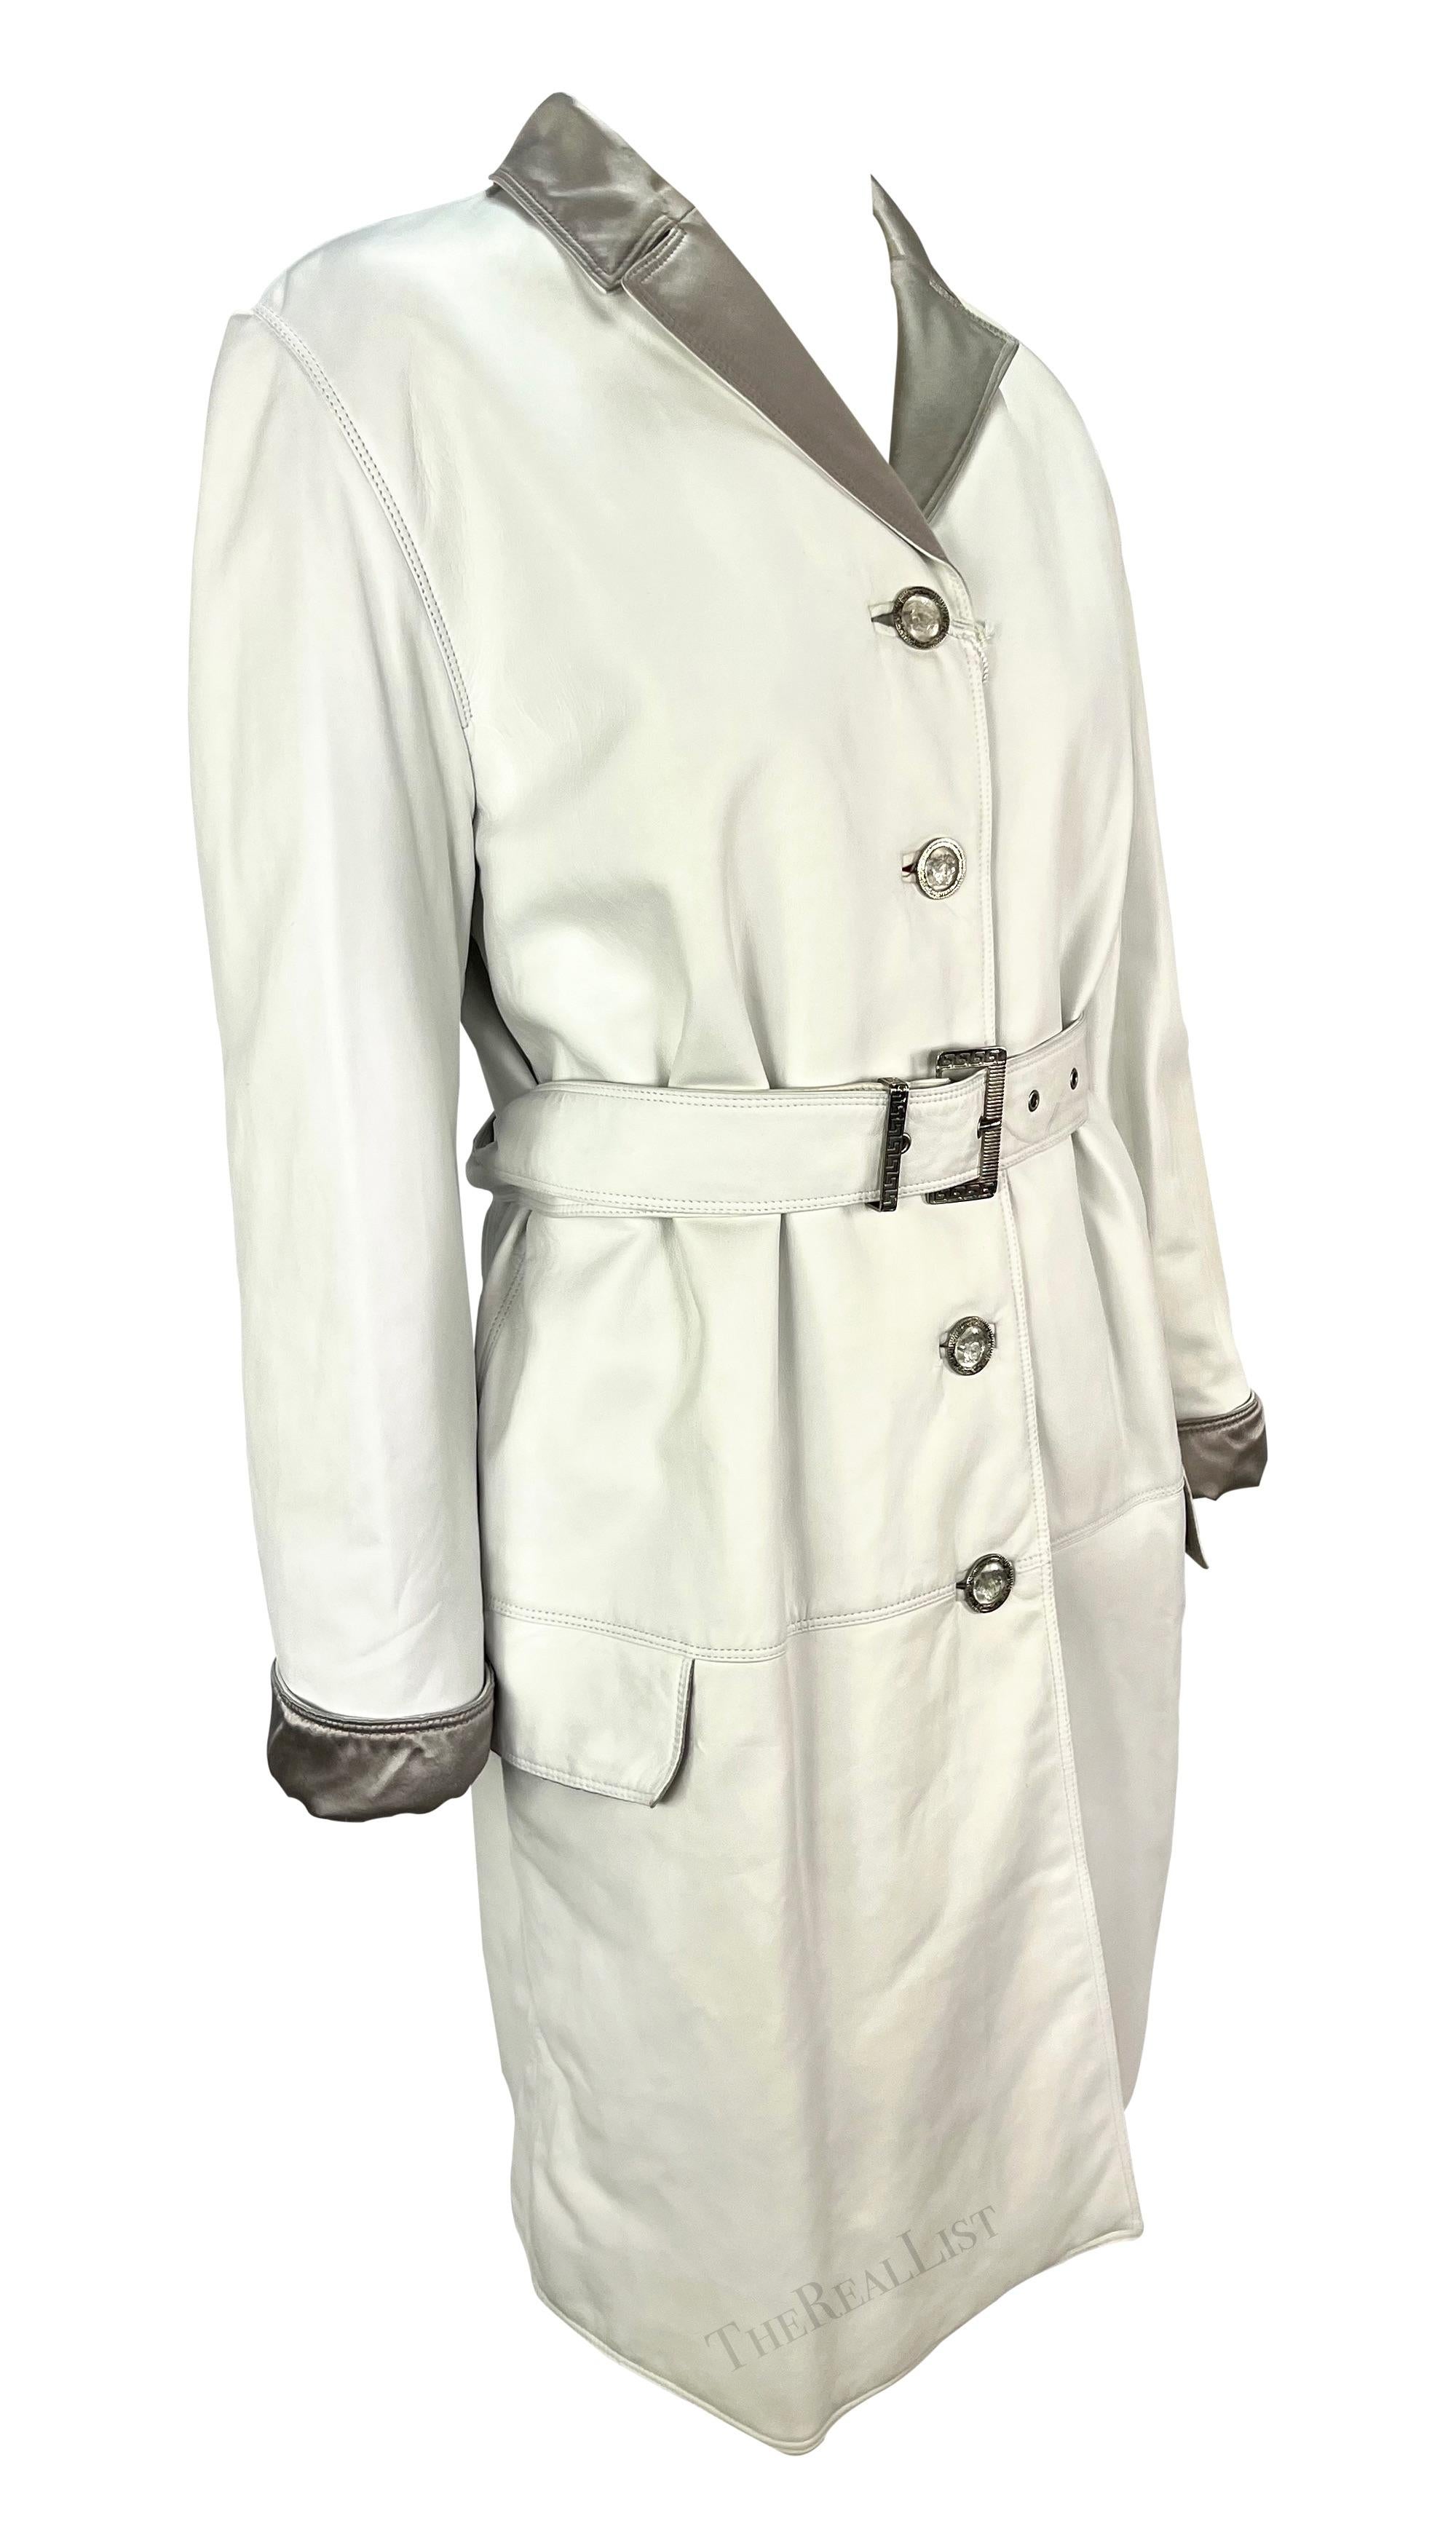 NWT F/W 1995 Gianni Versace Runway White Leather Silver Satin Medusa Car Coat For Sale 6